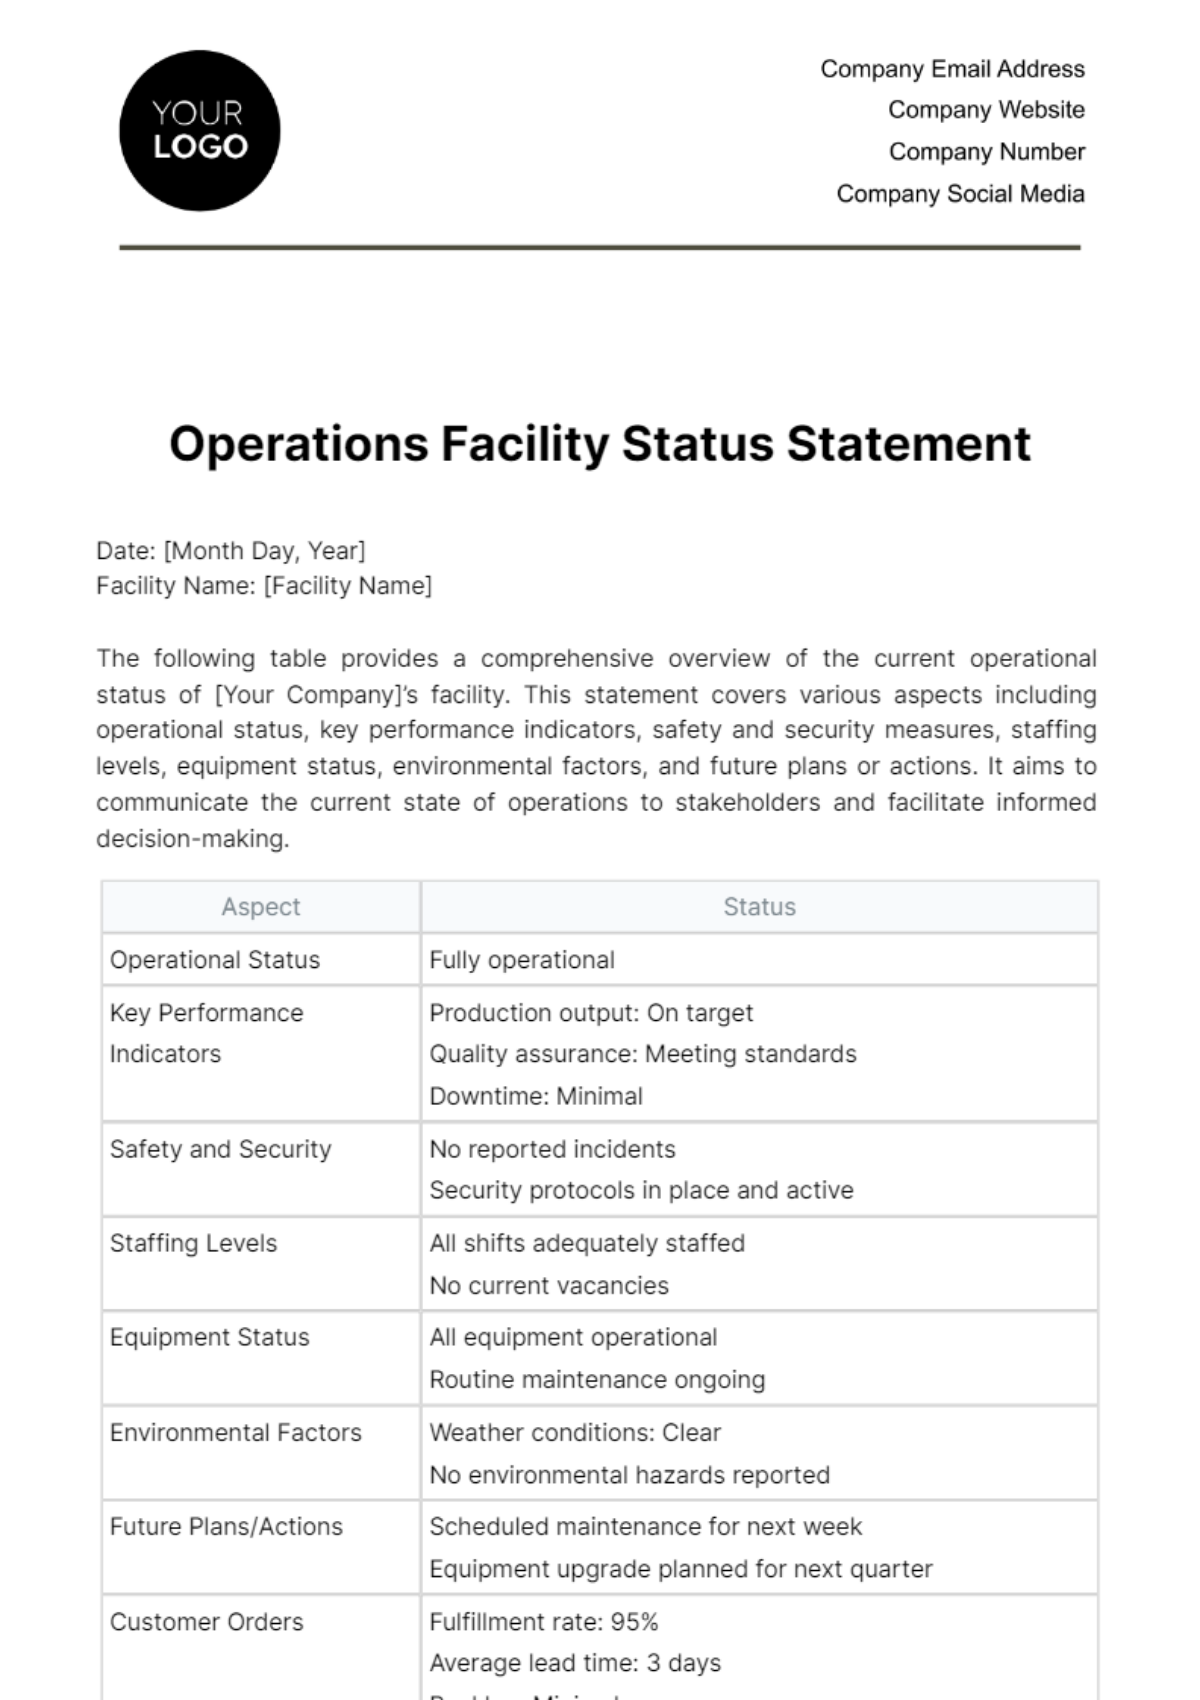 Operations Facility Status Statement Template